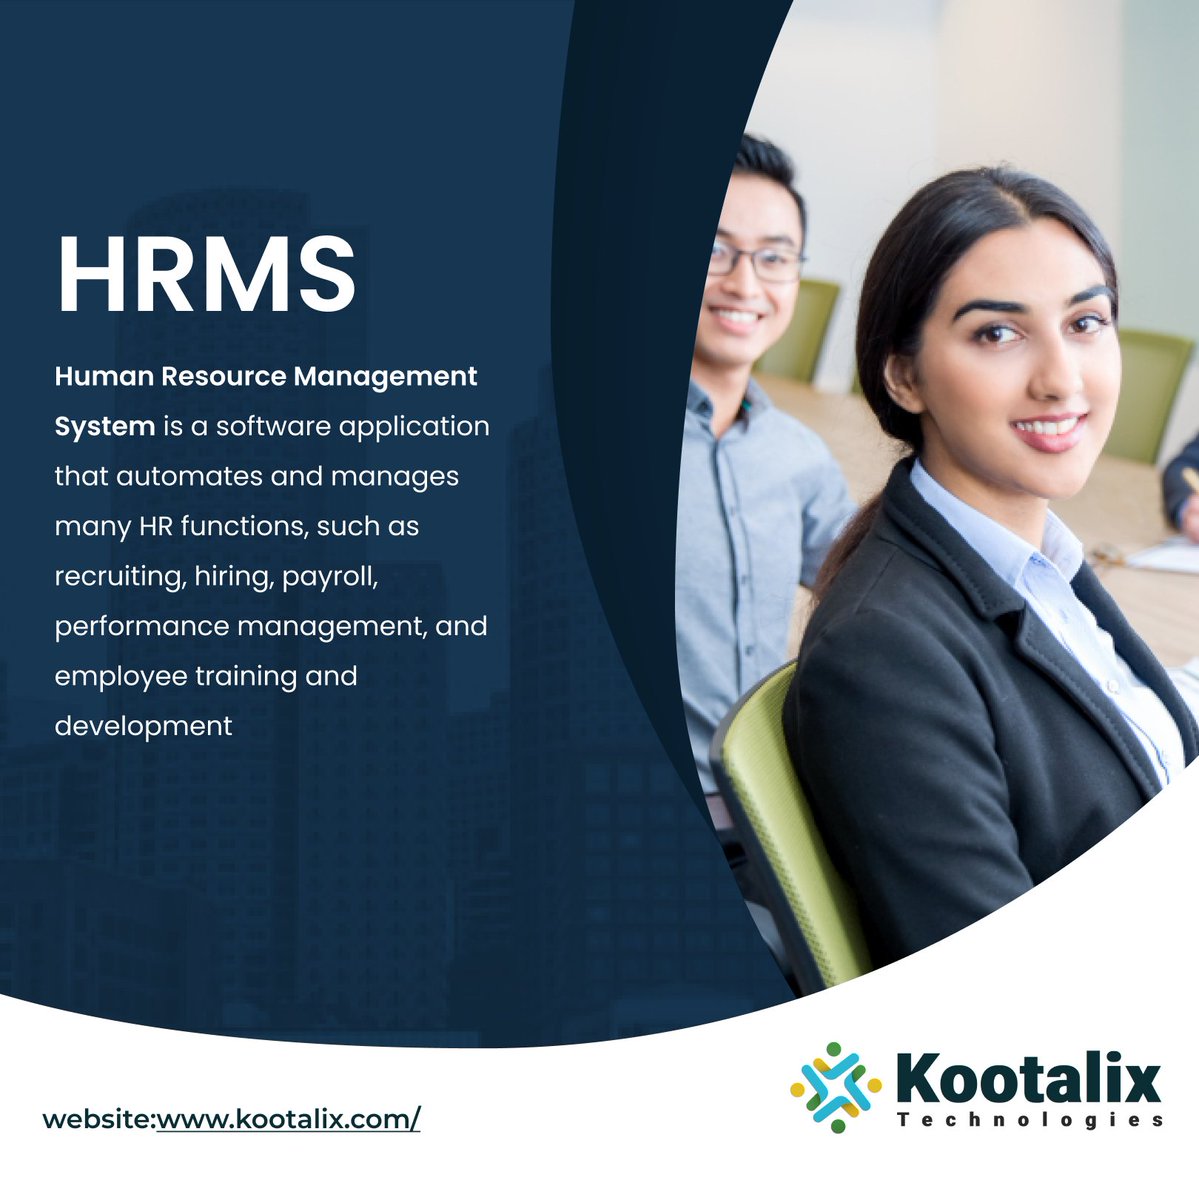 HRMS is a software that helps manage HR functions efficiently by automating processes like employee data management, payroll, benefits, time tracking, and performance management. #Kootalix #HRMS #WorkforceAnalytics #HRTechSolutions #HRAutomation #OrganizationalEfficiency